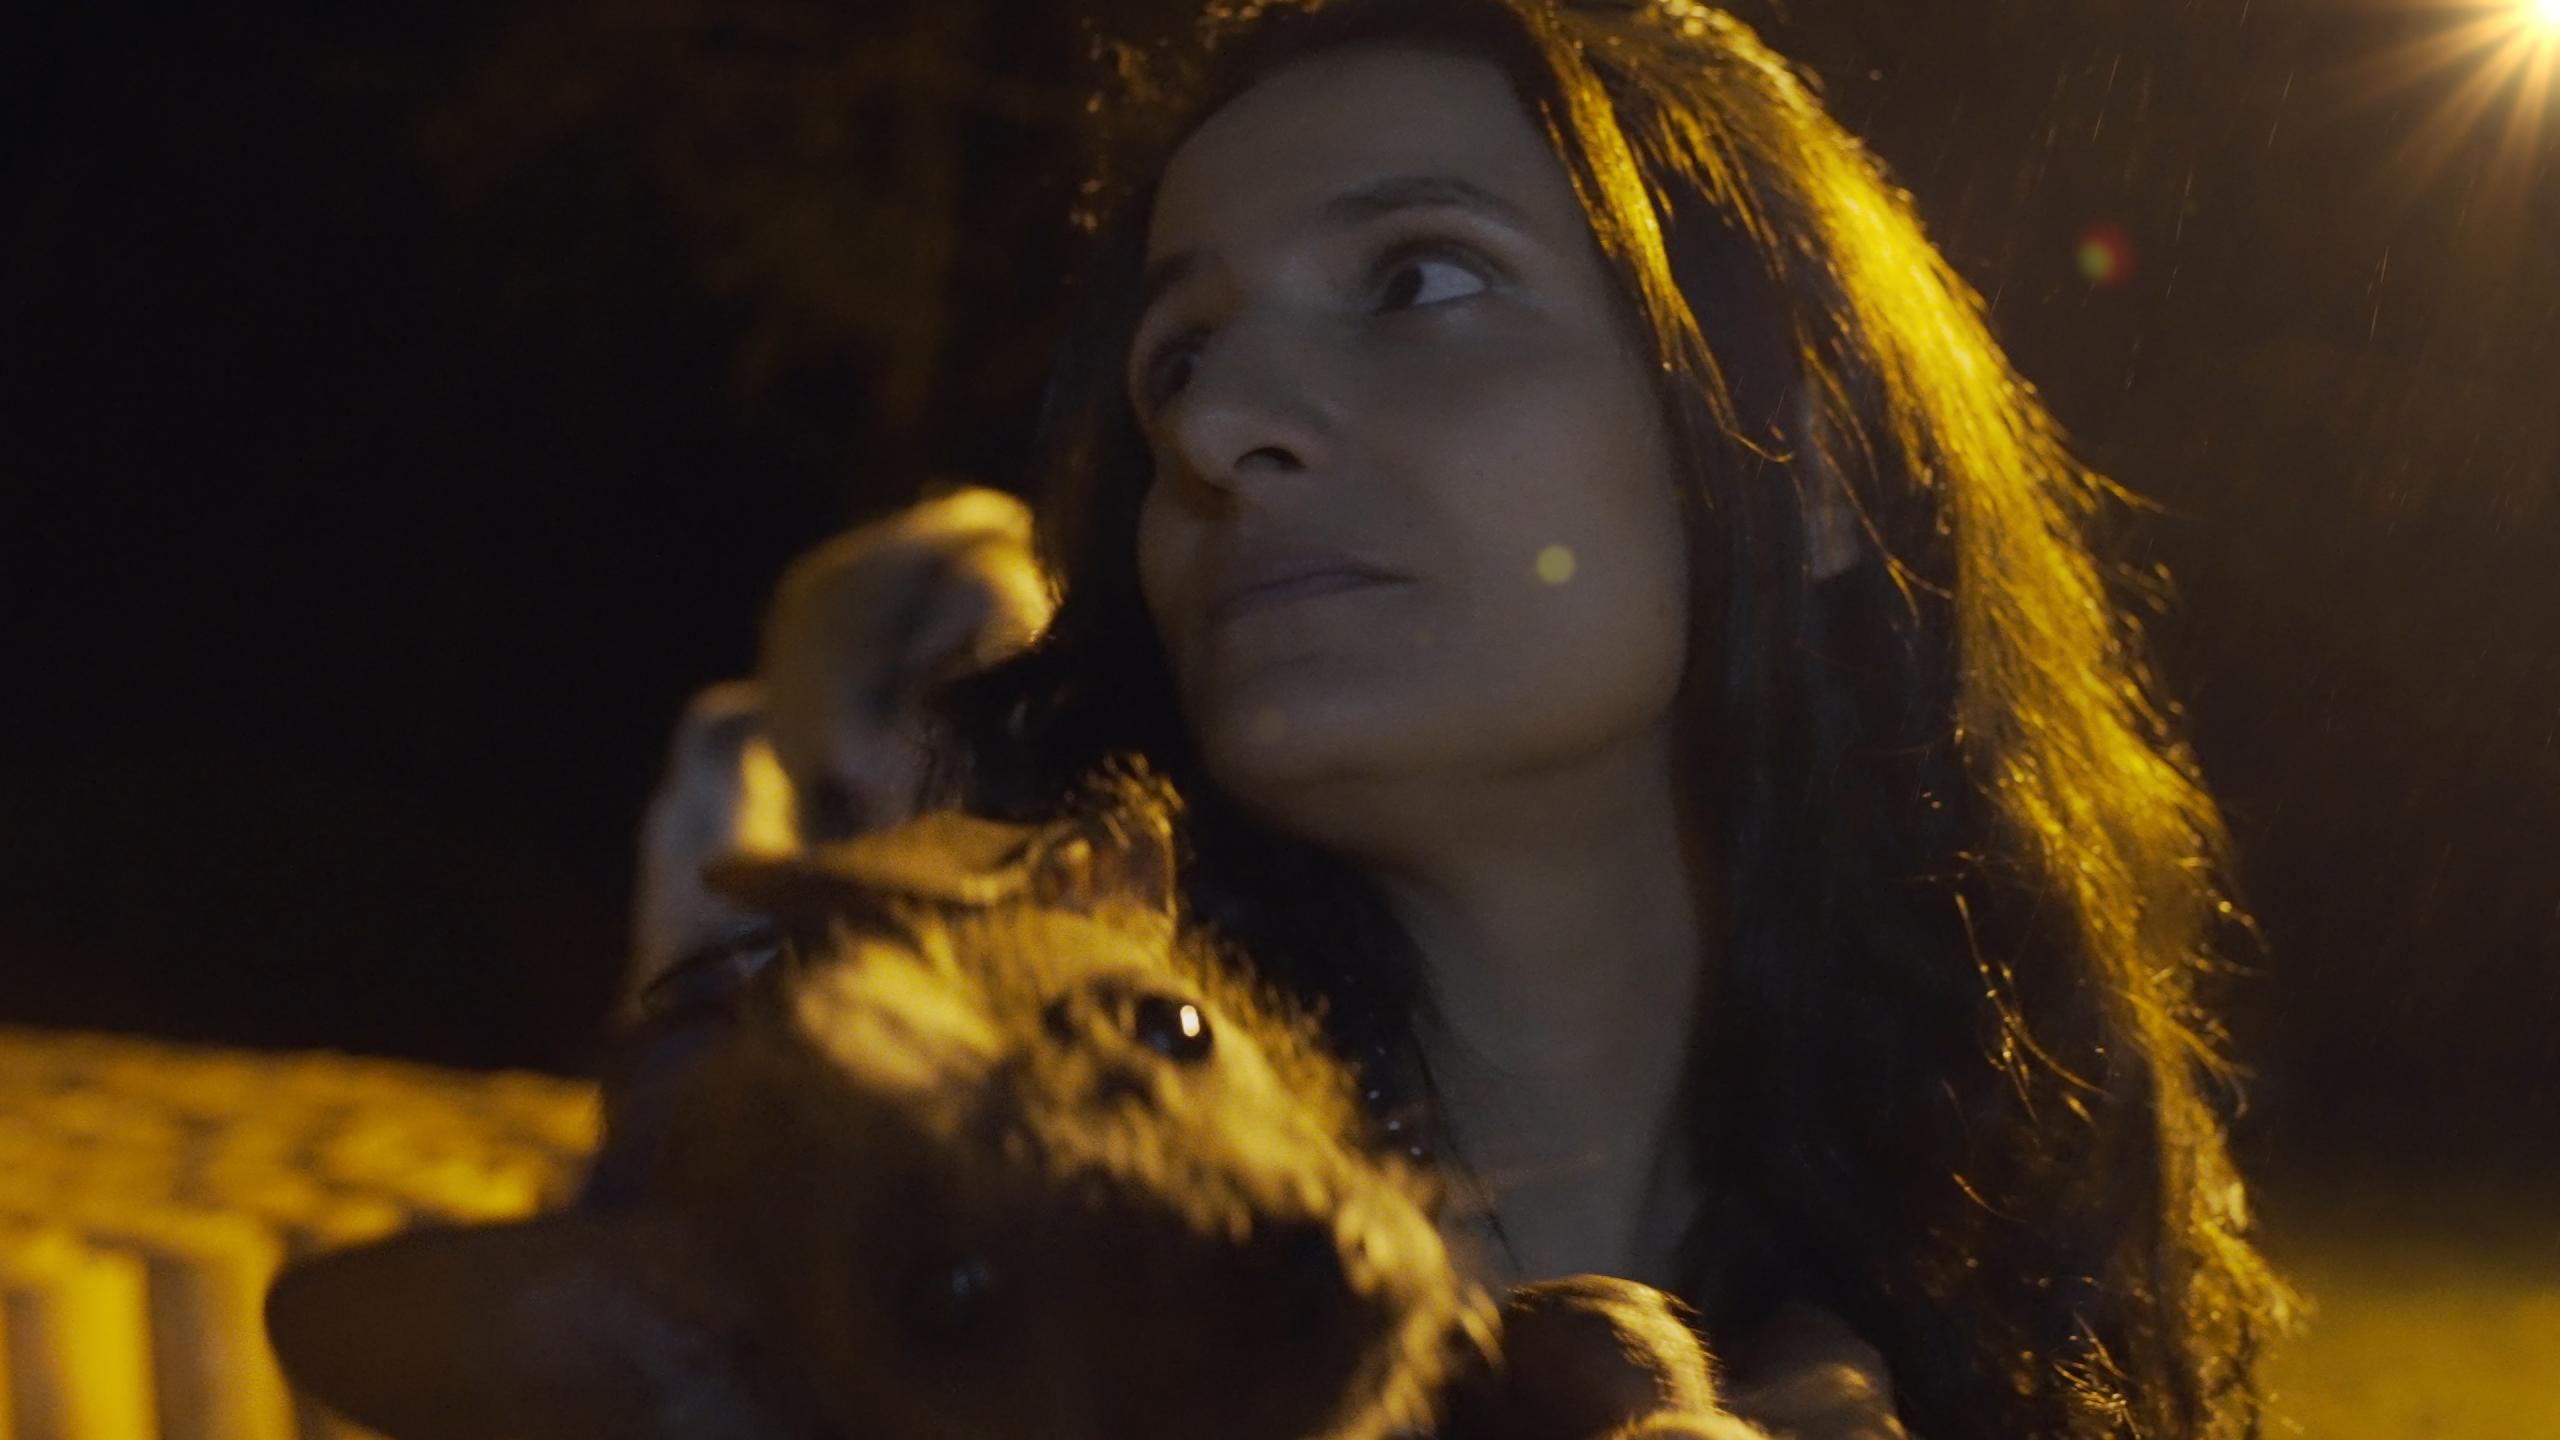 A woman with long dark hair holds a small dog in her arms. She looks to the side and is illuminated from behind by a bright lantern.